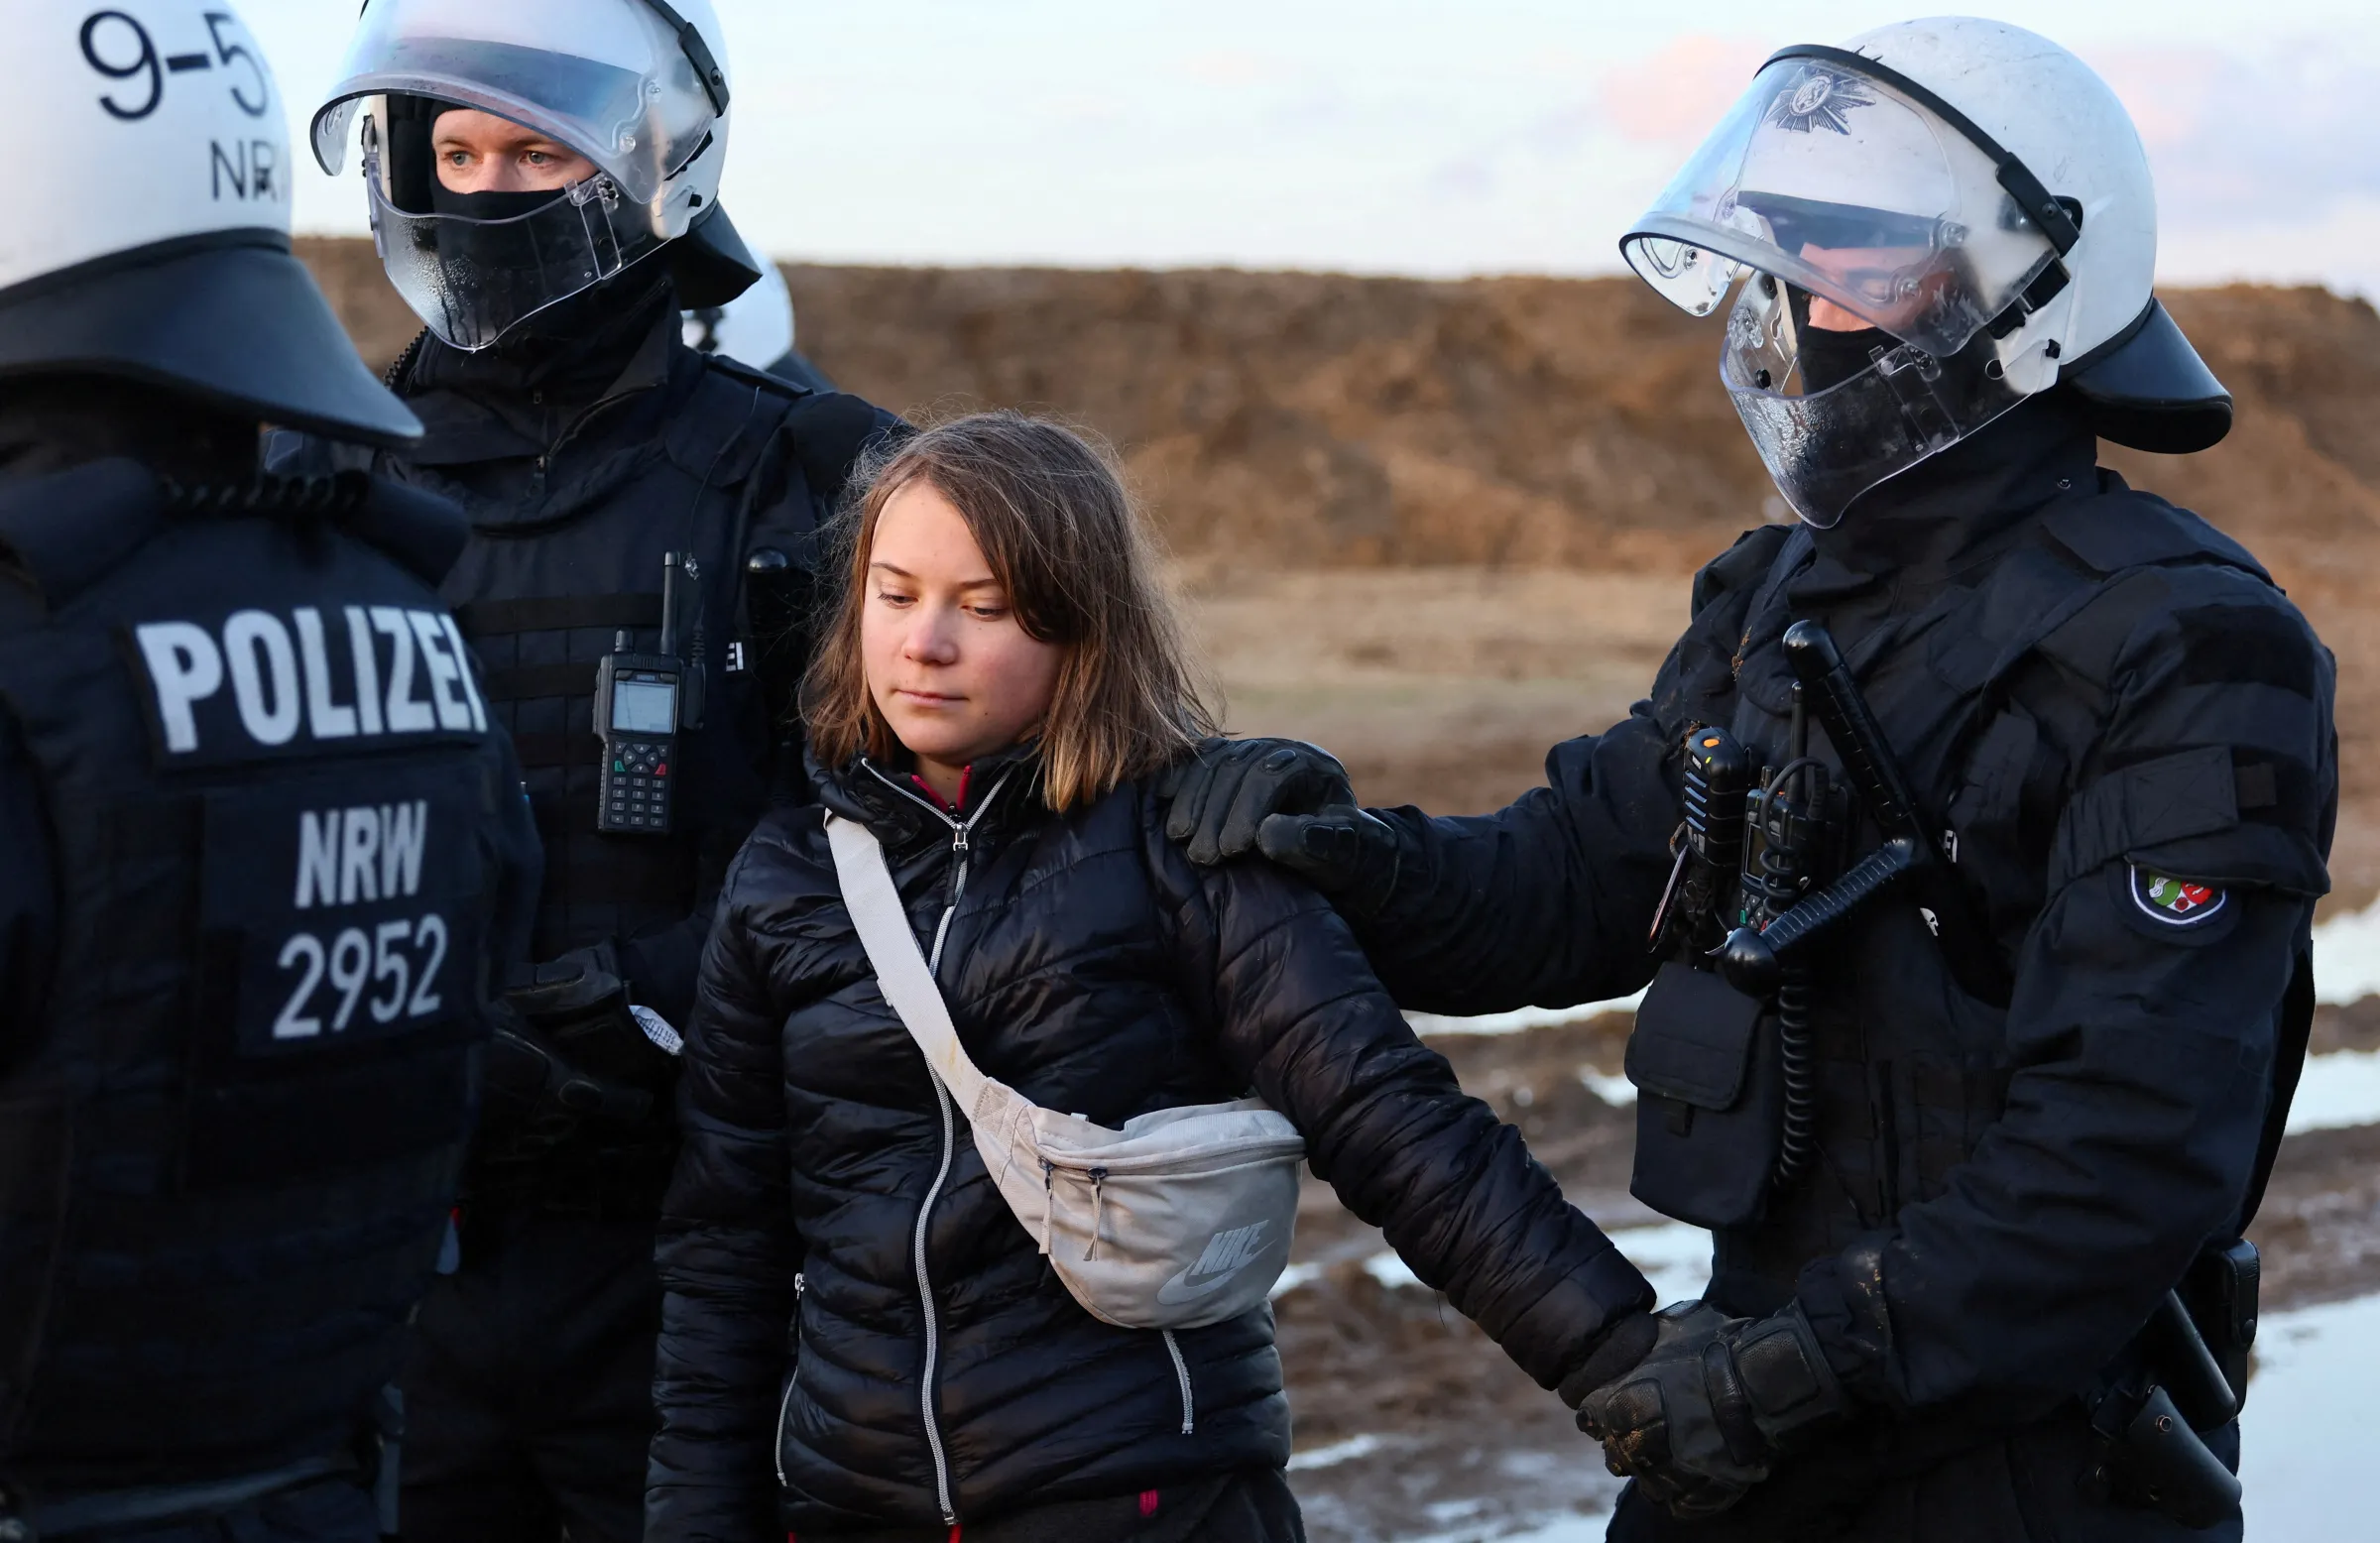 Police officers detain climate activist Greta Thunberg on the day of a protest against the expansion of the Garzweiler open-cast lignite mine of Germany's utility RWE to Luetzerath, in Germany, January 17, 2023 that has highlighted tensions over Germany's climate policy during an energy crisis. REUTERS/Wolfgang Rattay